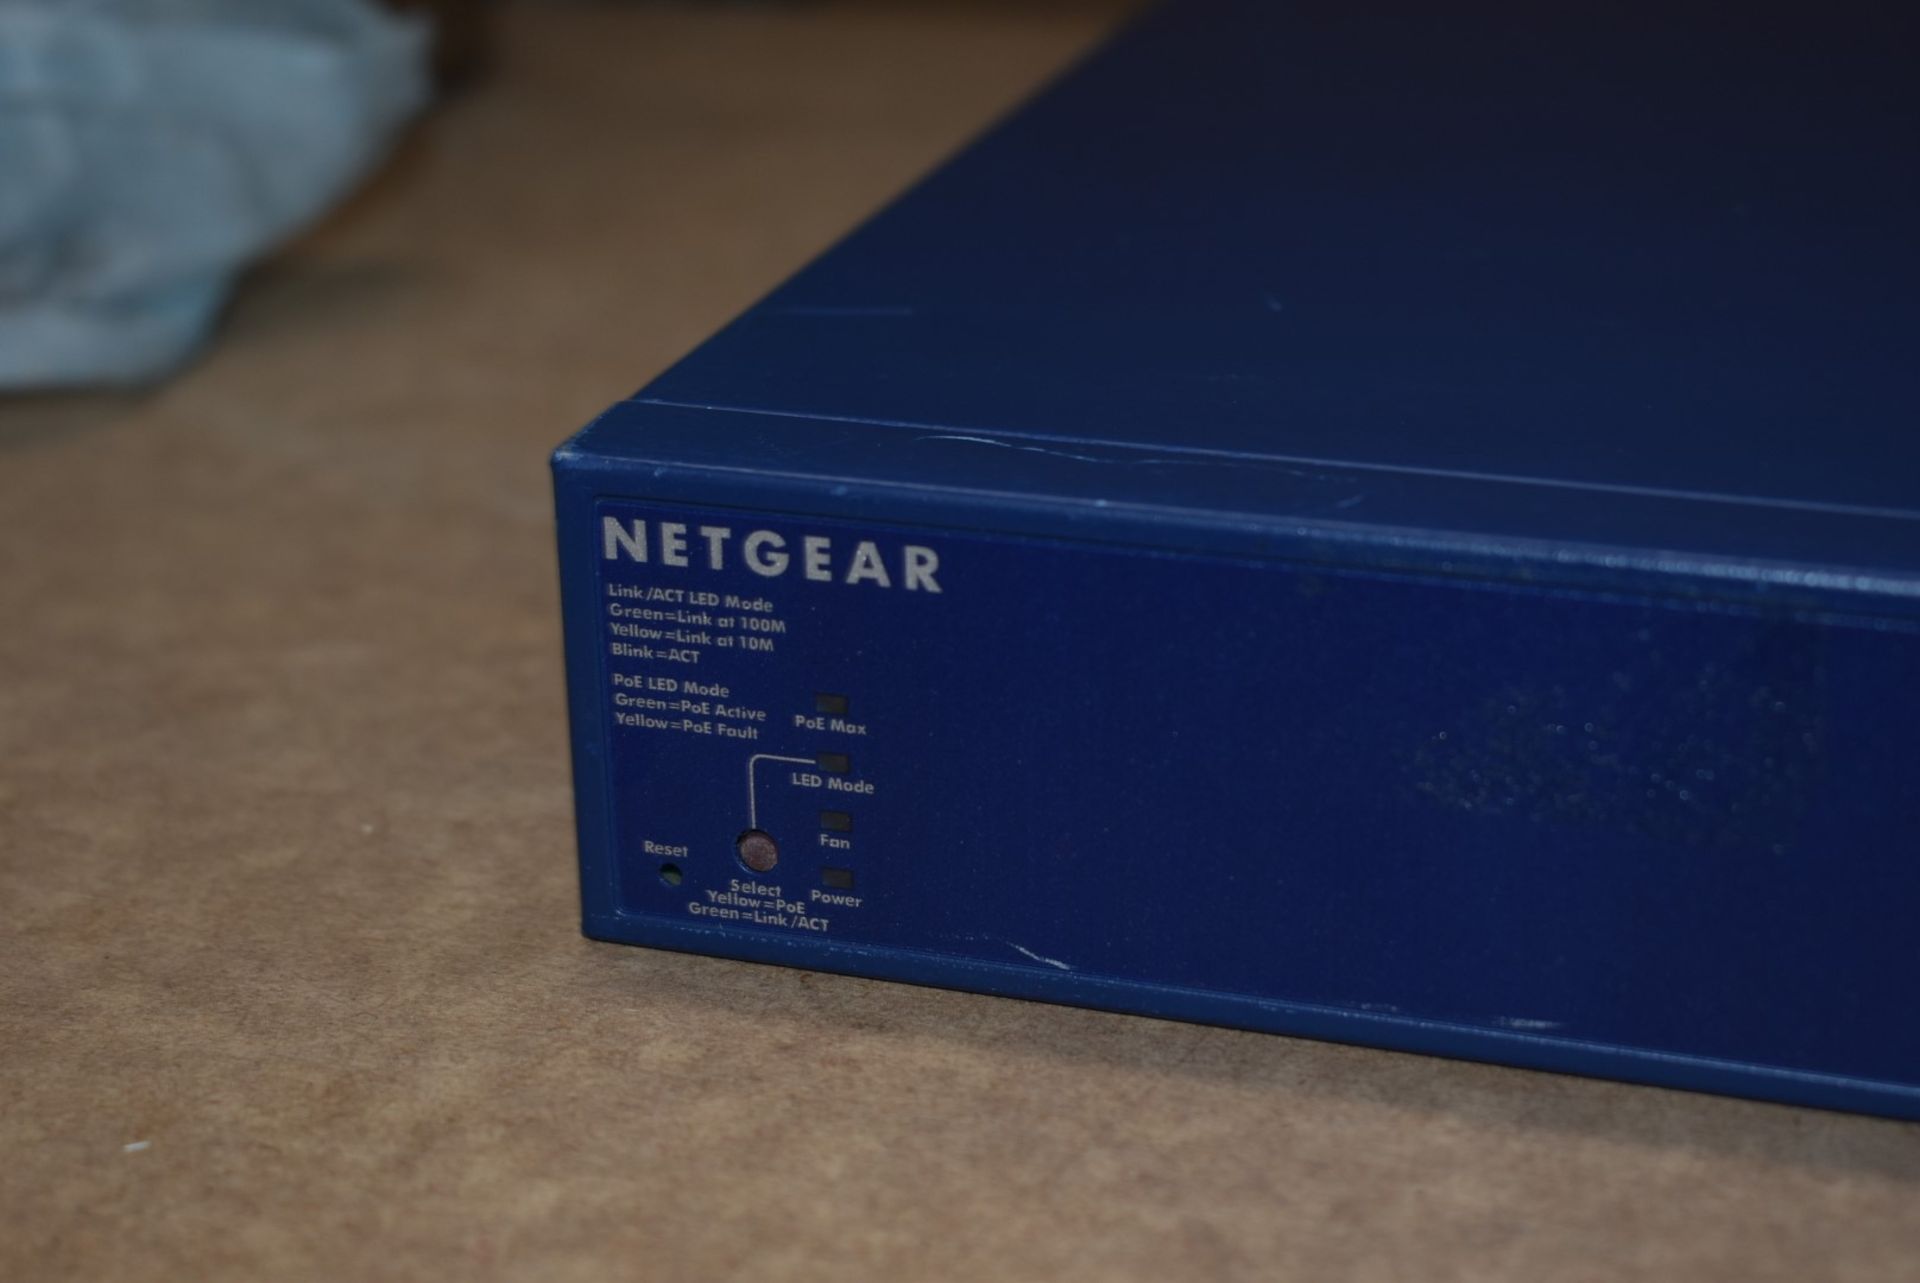 1 x Netgear FS728TP V2H1 24-Port 10/100 Smart Managed Switch with POE - RRP £453 - Includes Power - Image 4 of 6